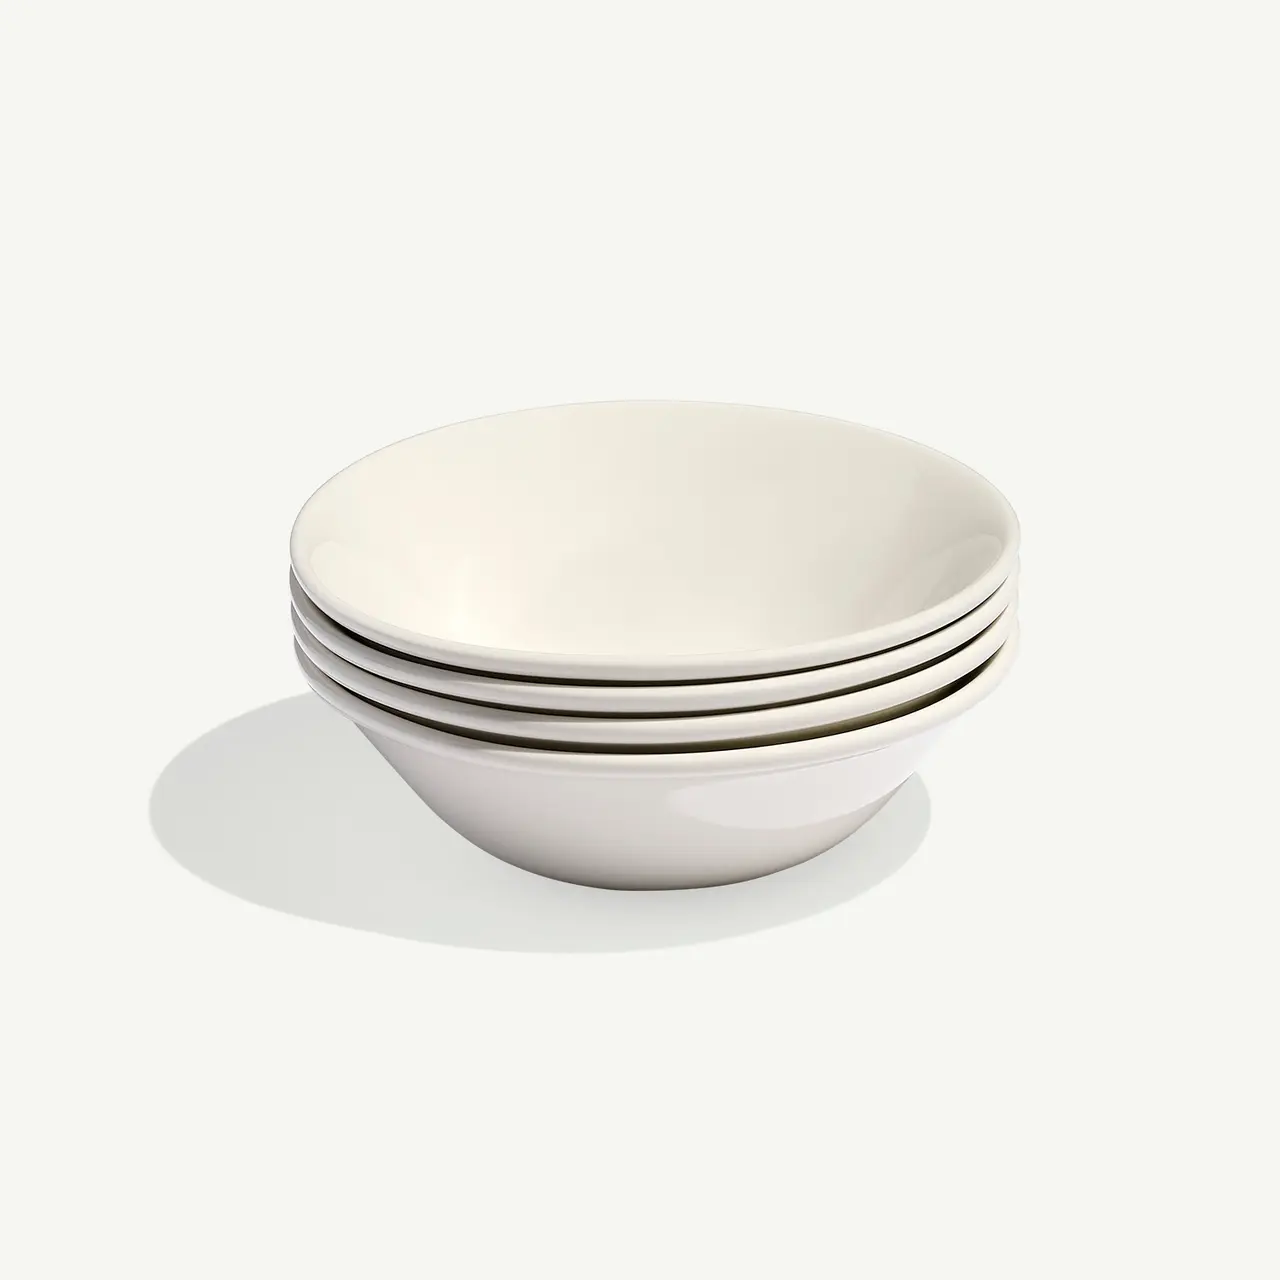 A stack of four white ceramic bowls on a light background.